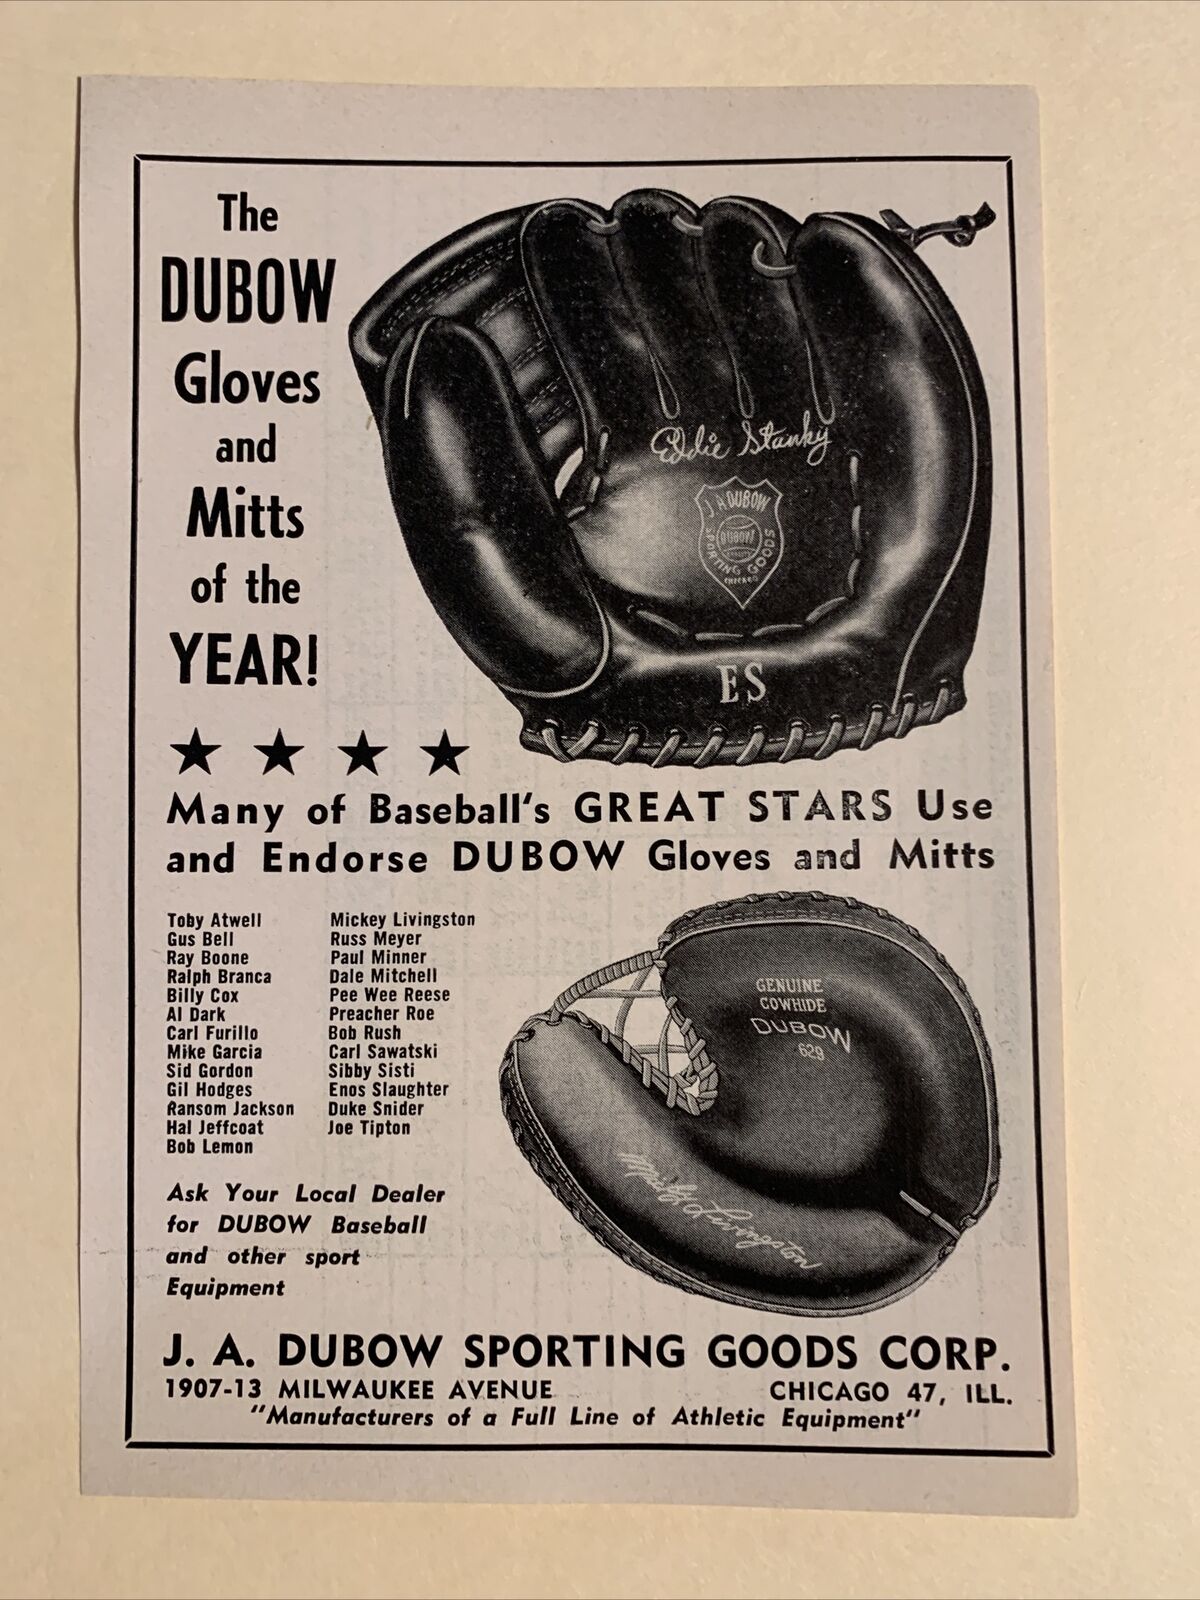 Dubow Gloves Mitts Eddie Stanky Gil Hodges Rush 1954 Baseball Publication 5X7 Ad